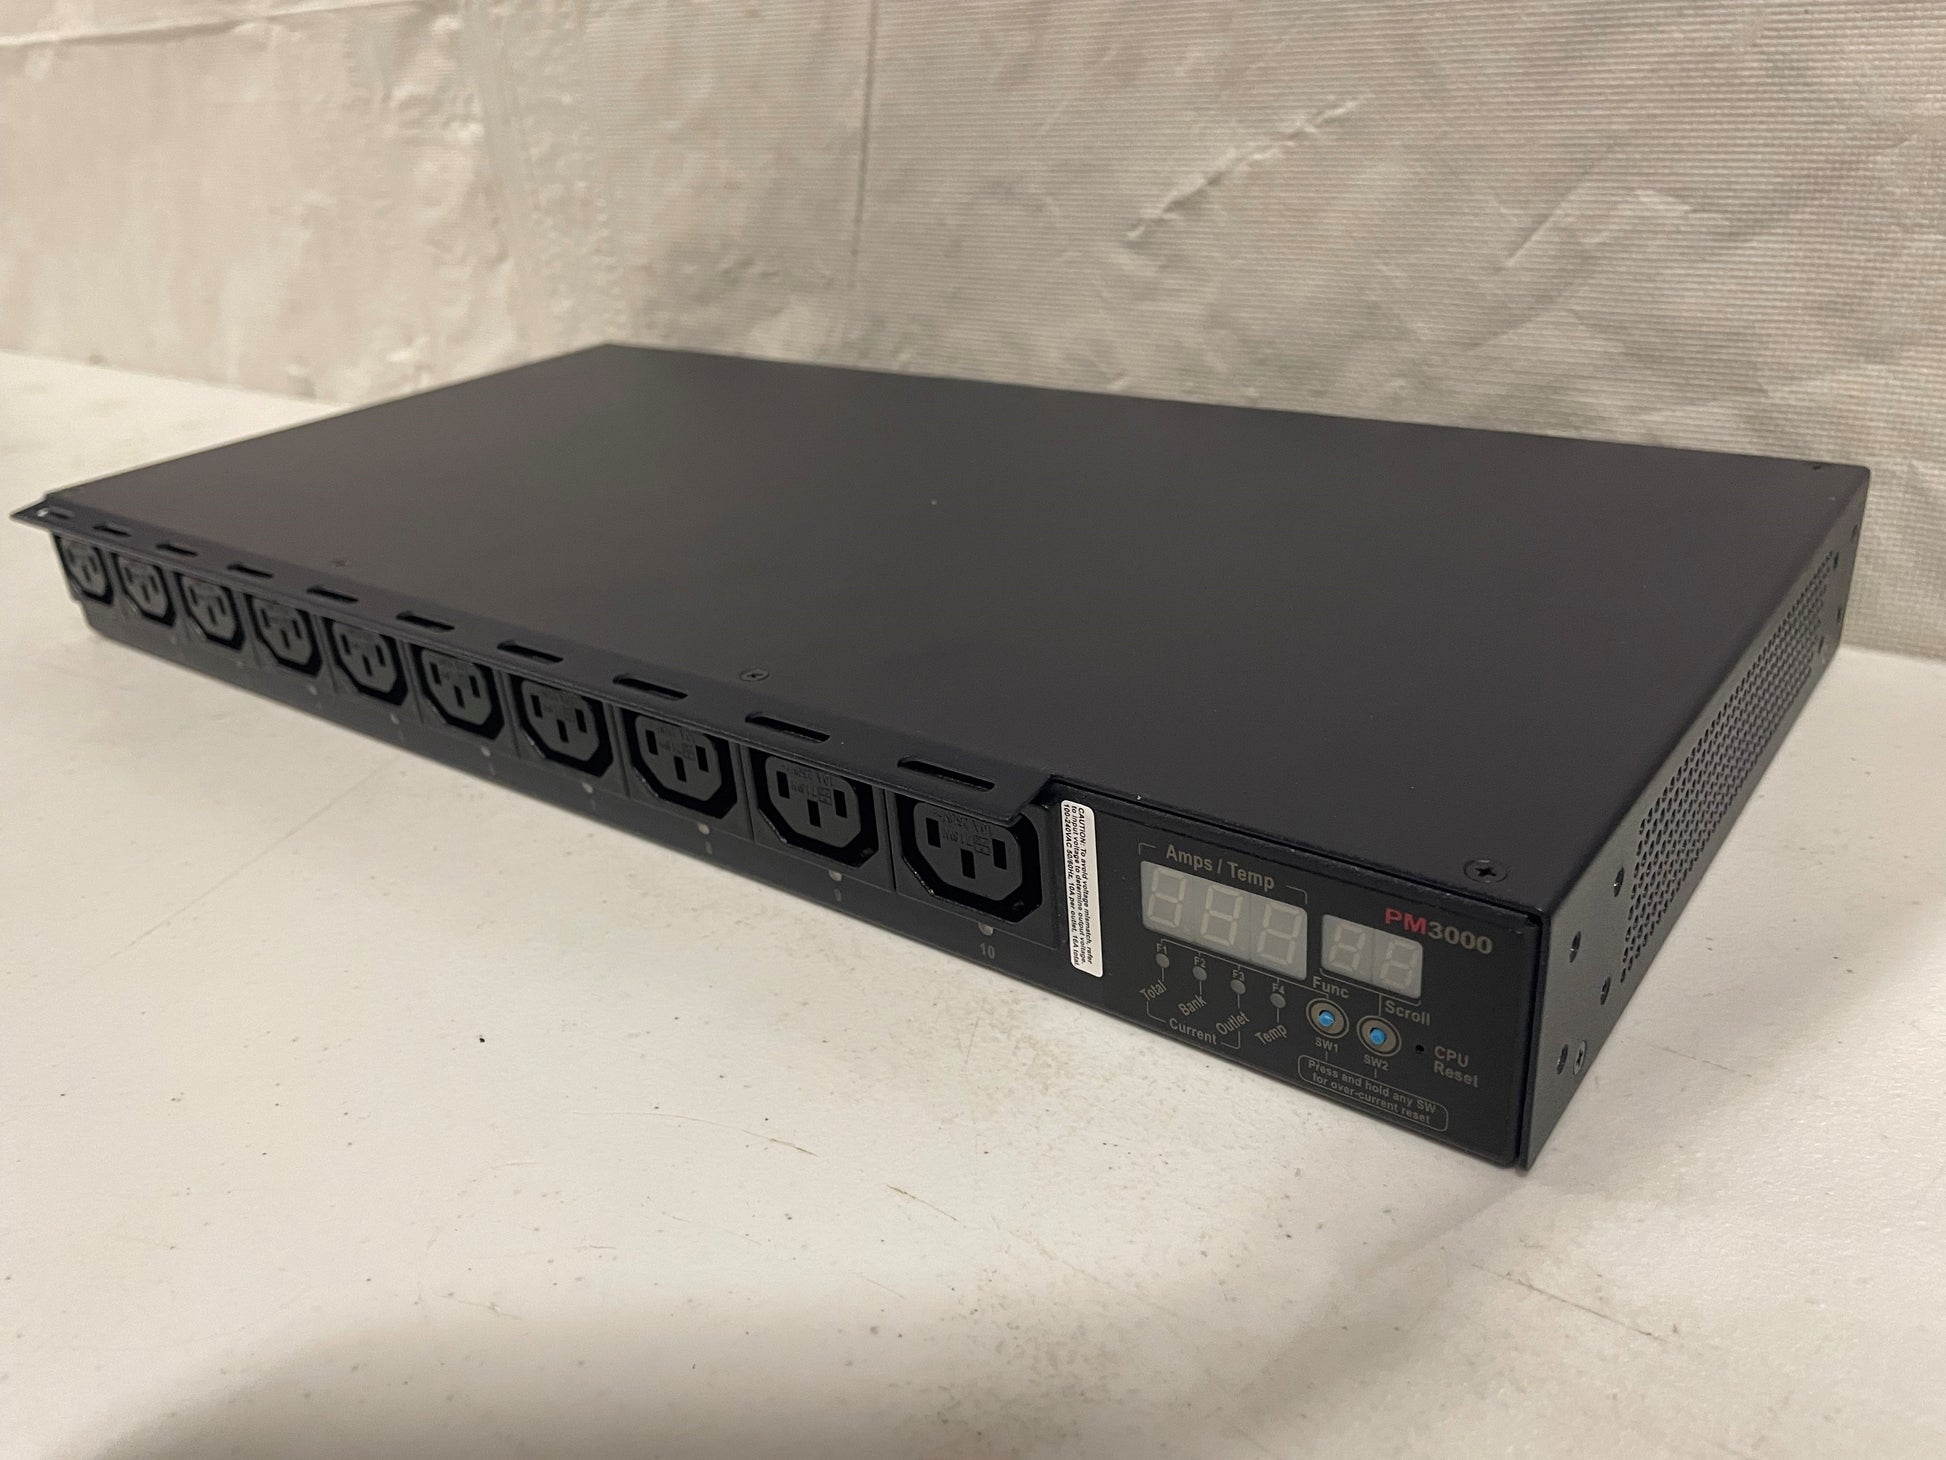 Avocent PM3000 , 10-Outlets. We Sell Professional Audio Equipment. Audio Systems, Amplifiers, Consoles, Mixers, Electronics, Entertainment, Sound, Live.